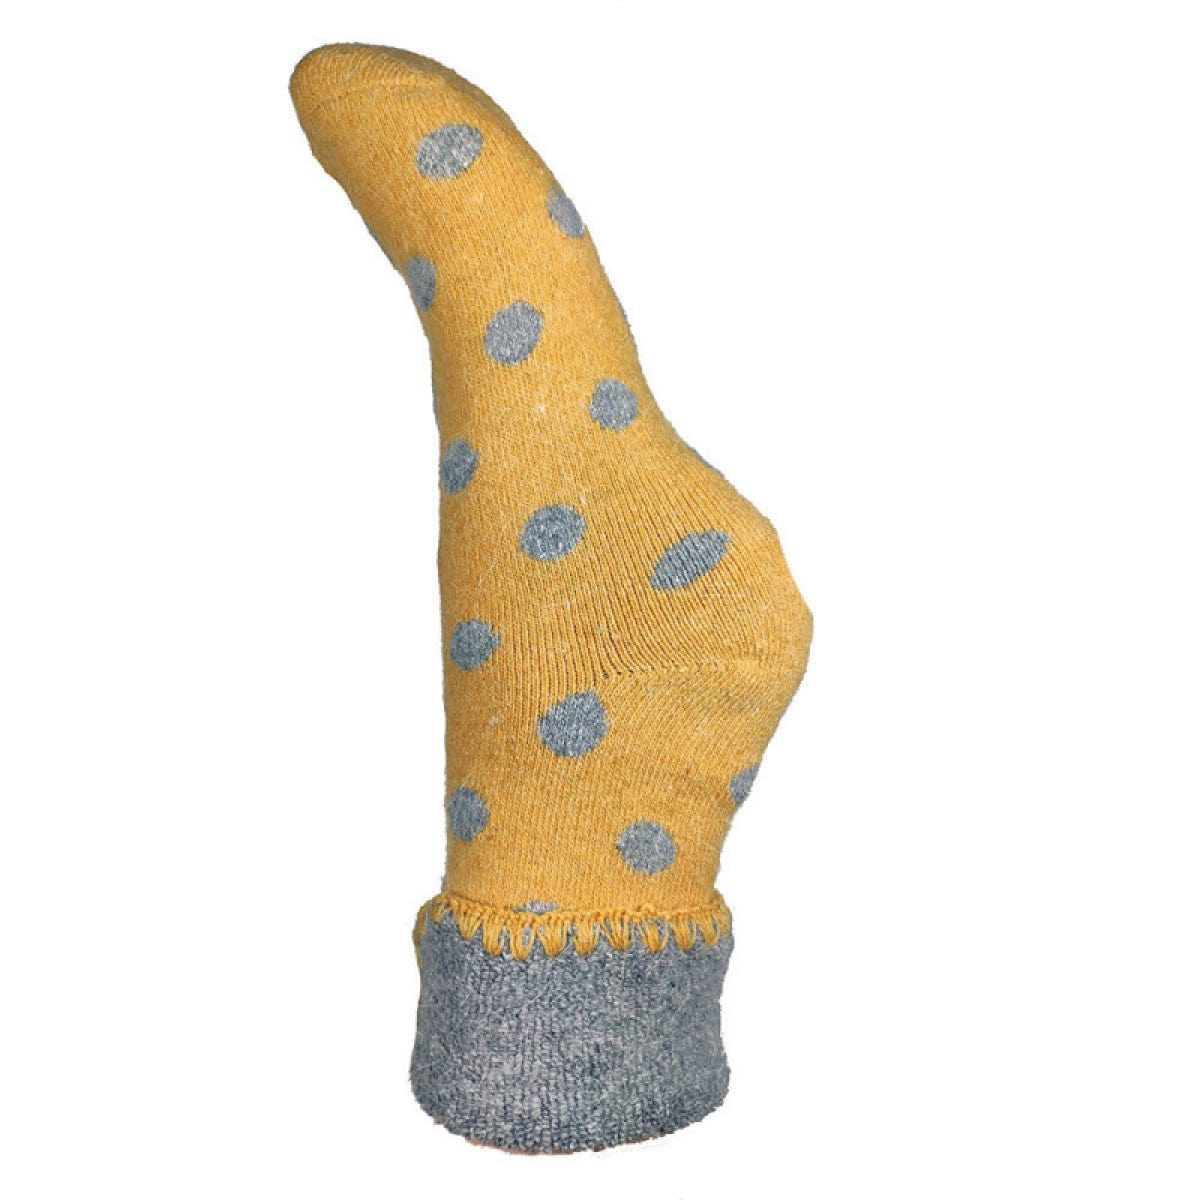 lusciousscarves Yellow Wool Blend Cuff Socks with Grey Spots.